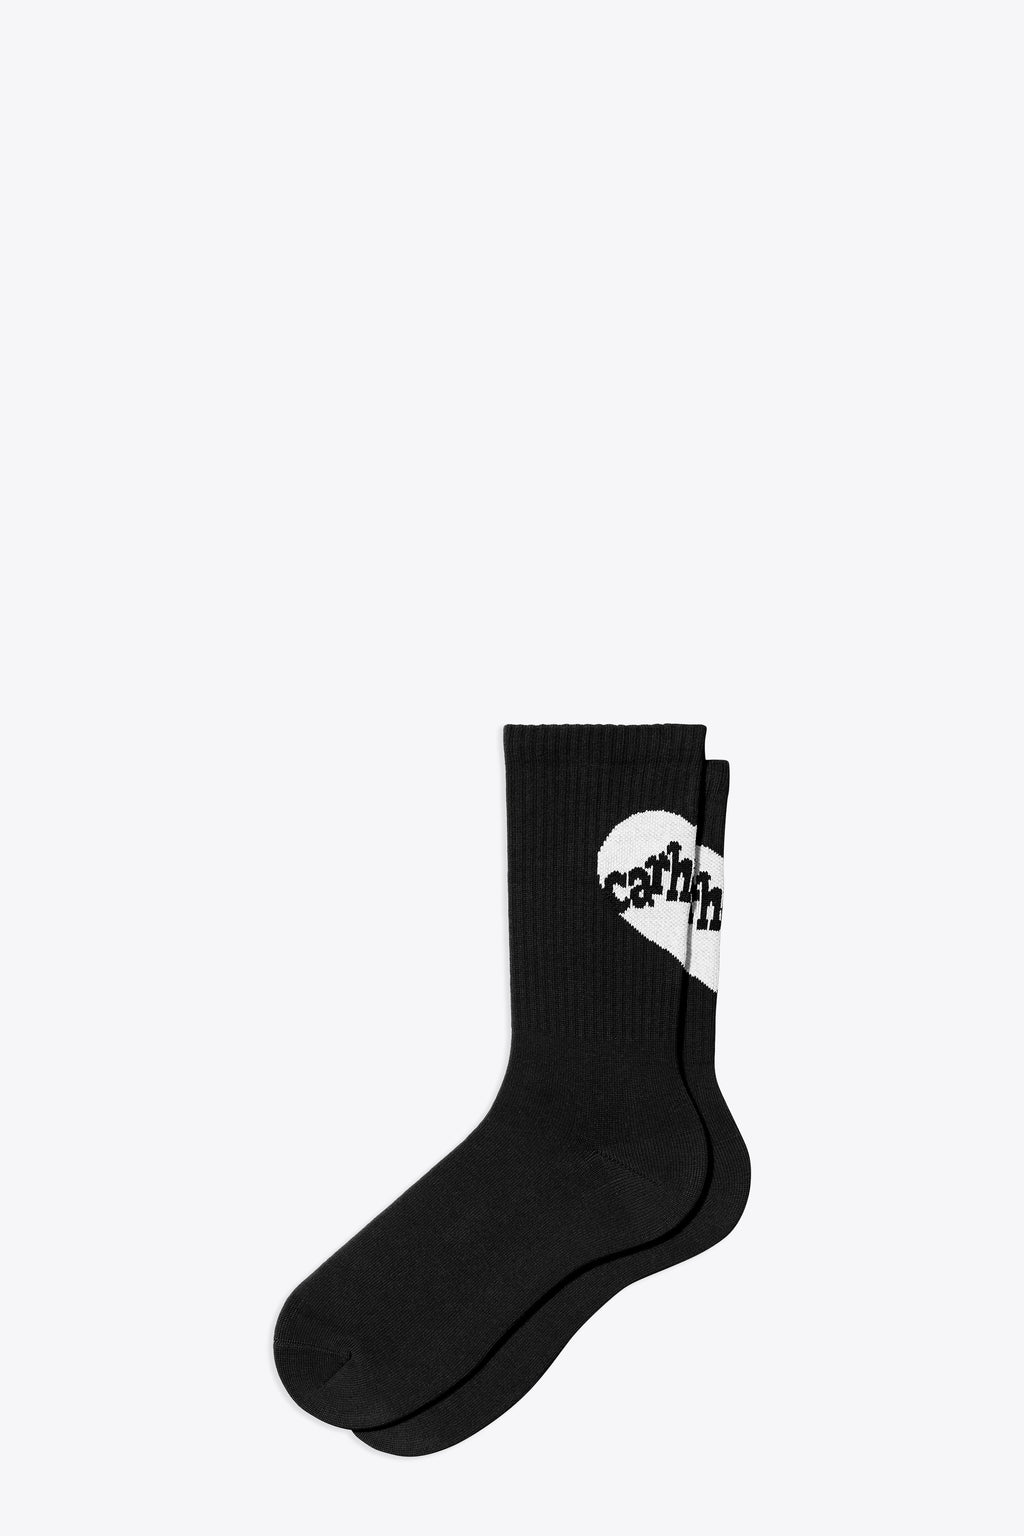 alt-image__Black-cotton-socks-with-heart-graphic-and-logo---Amour-Socks